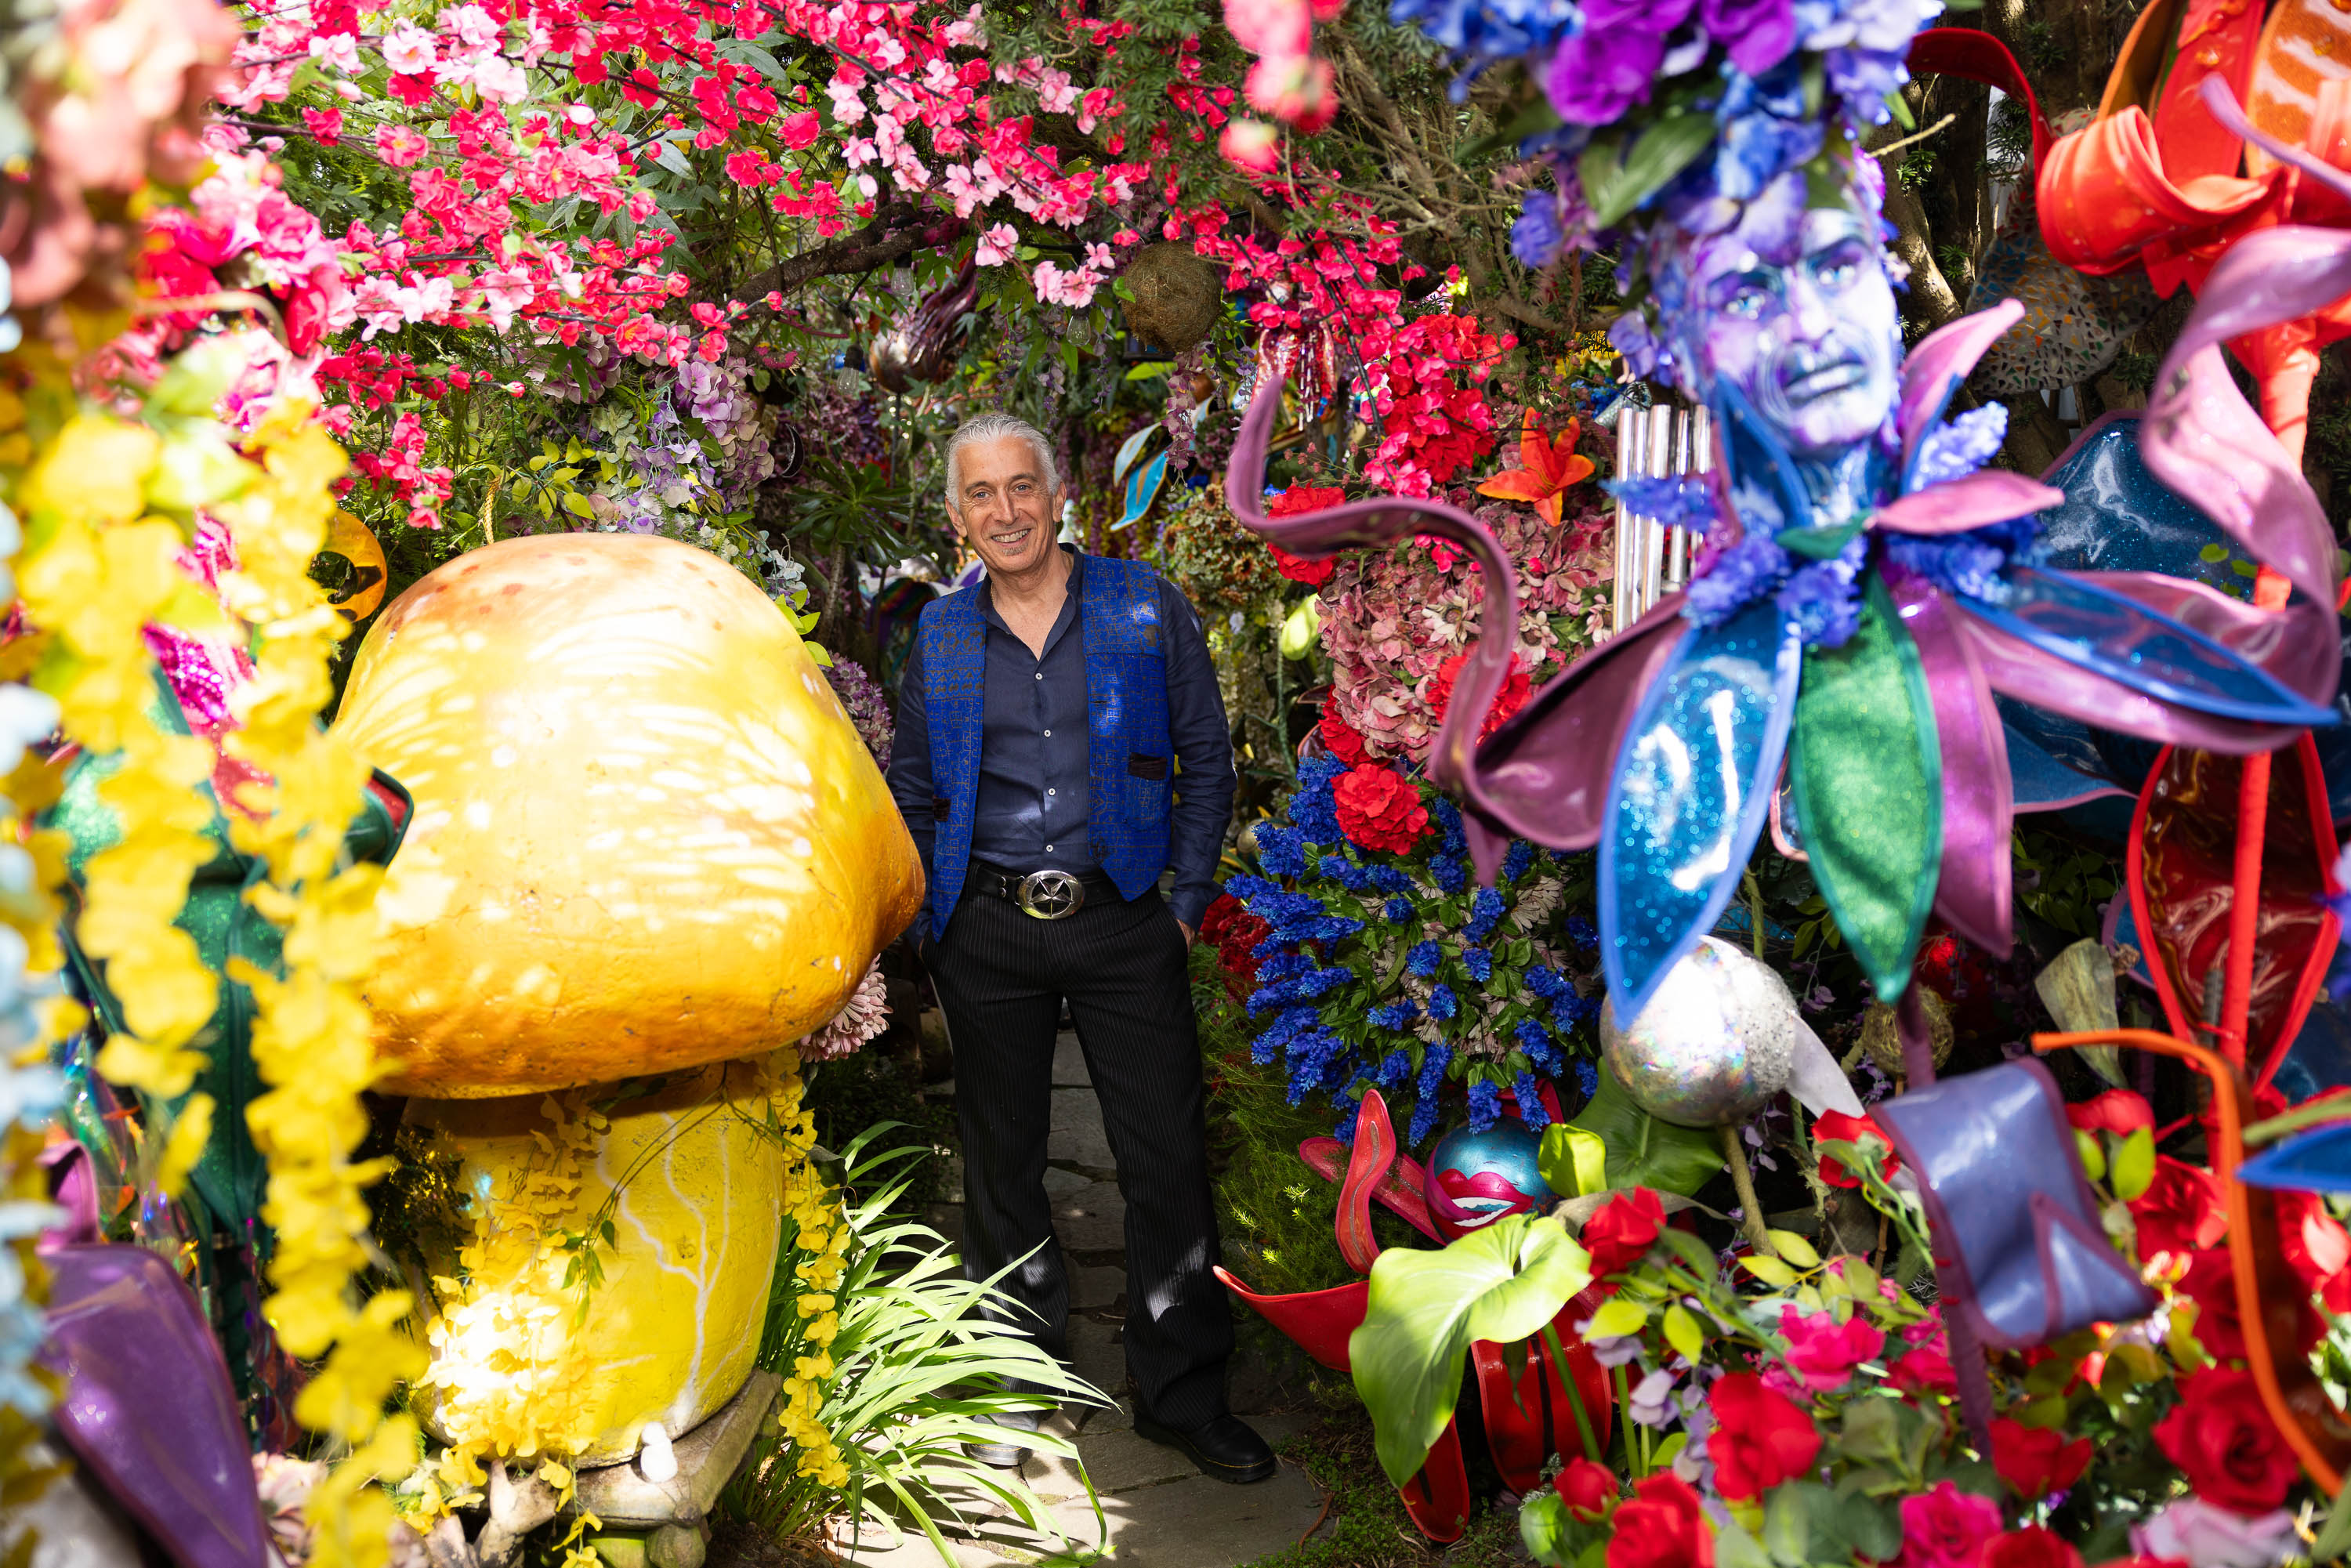 A man stands among colorful flowers and whimsical decorations, including a large fake mushroom.